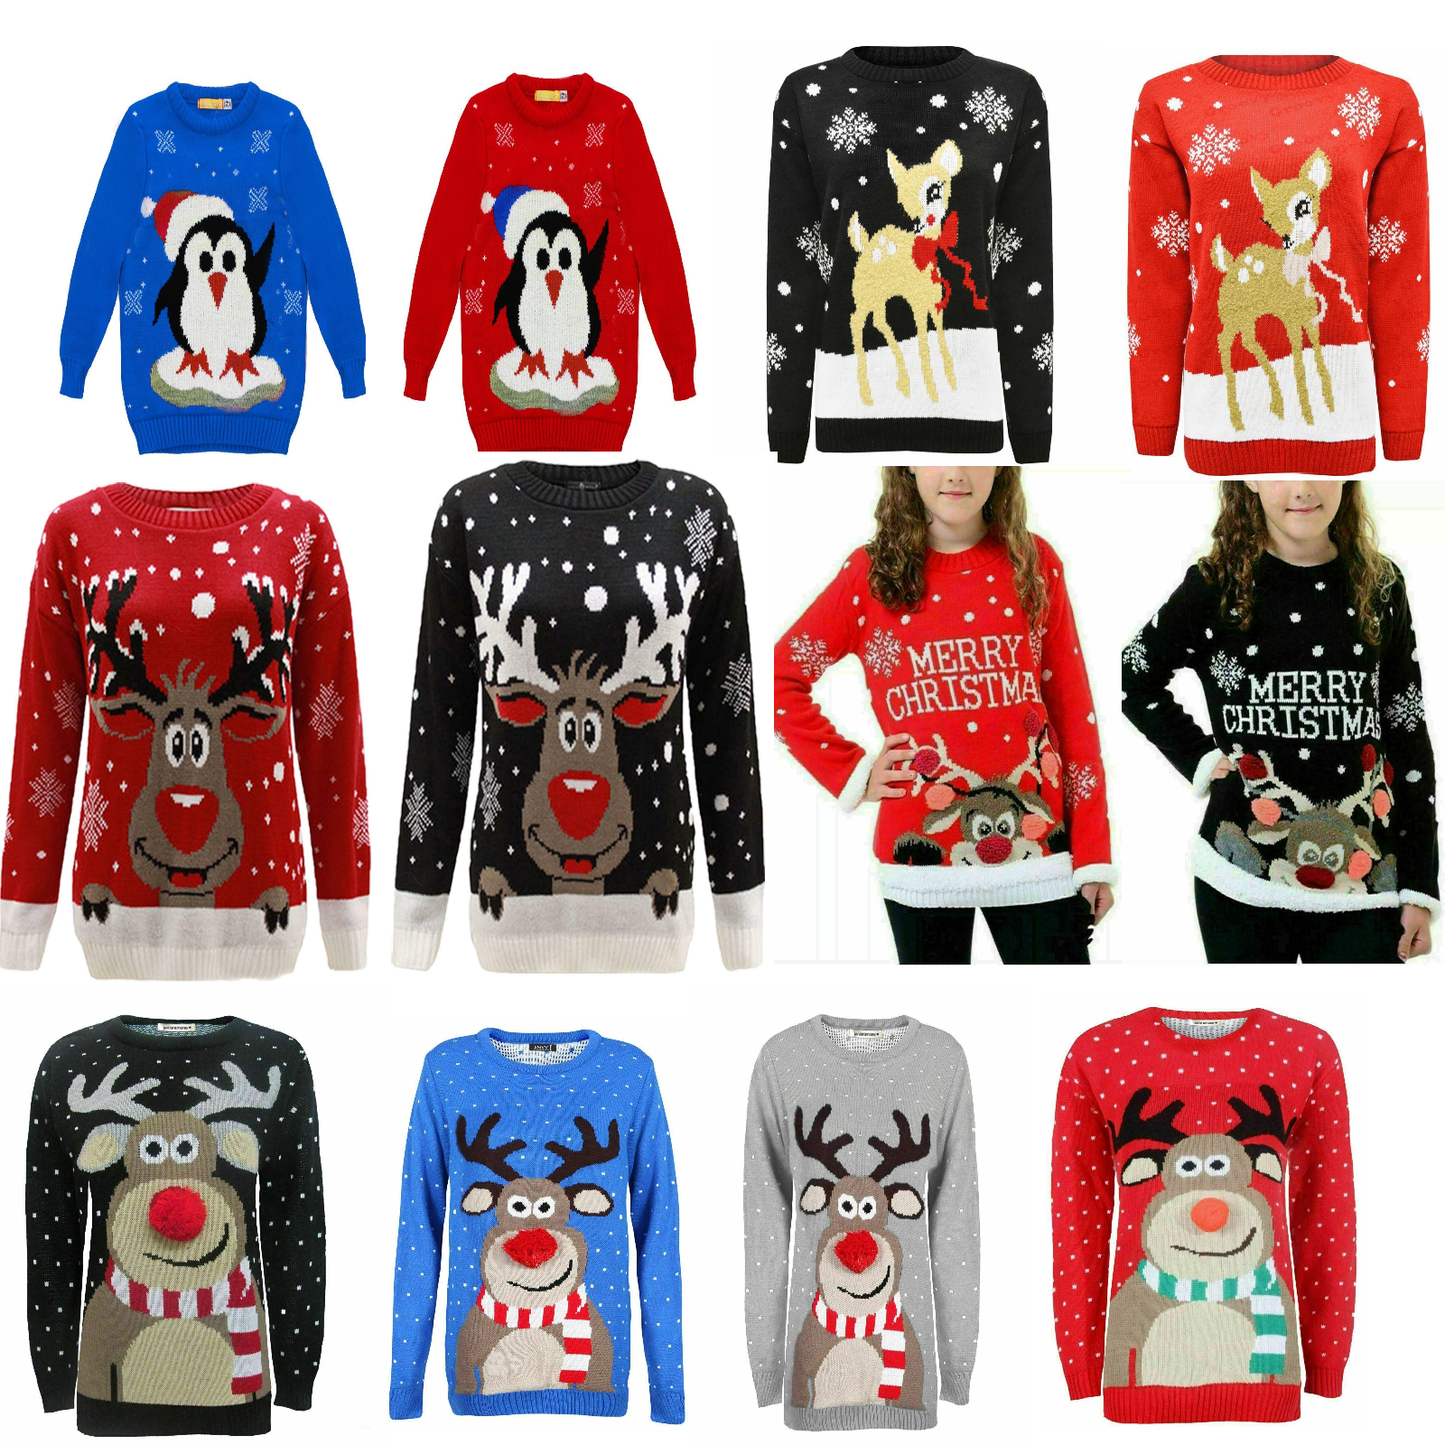 Children's Christmas Jumpers. Multiple Colours And Designs Available. Sizes 3-14. Perfect For Celebrating On Christmas Day.